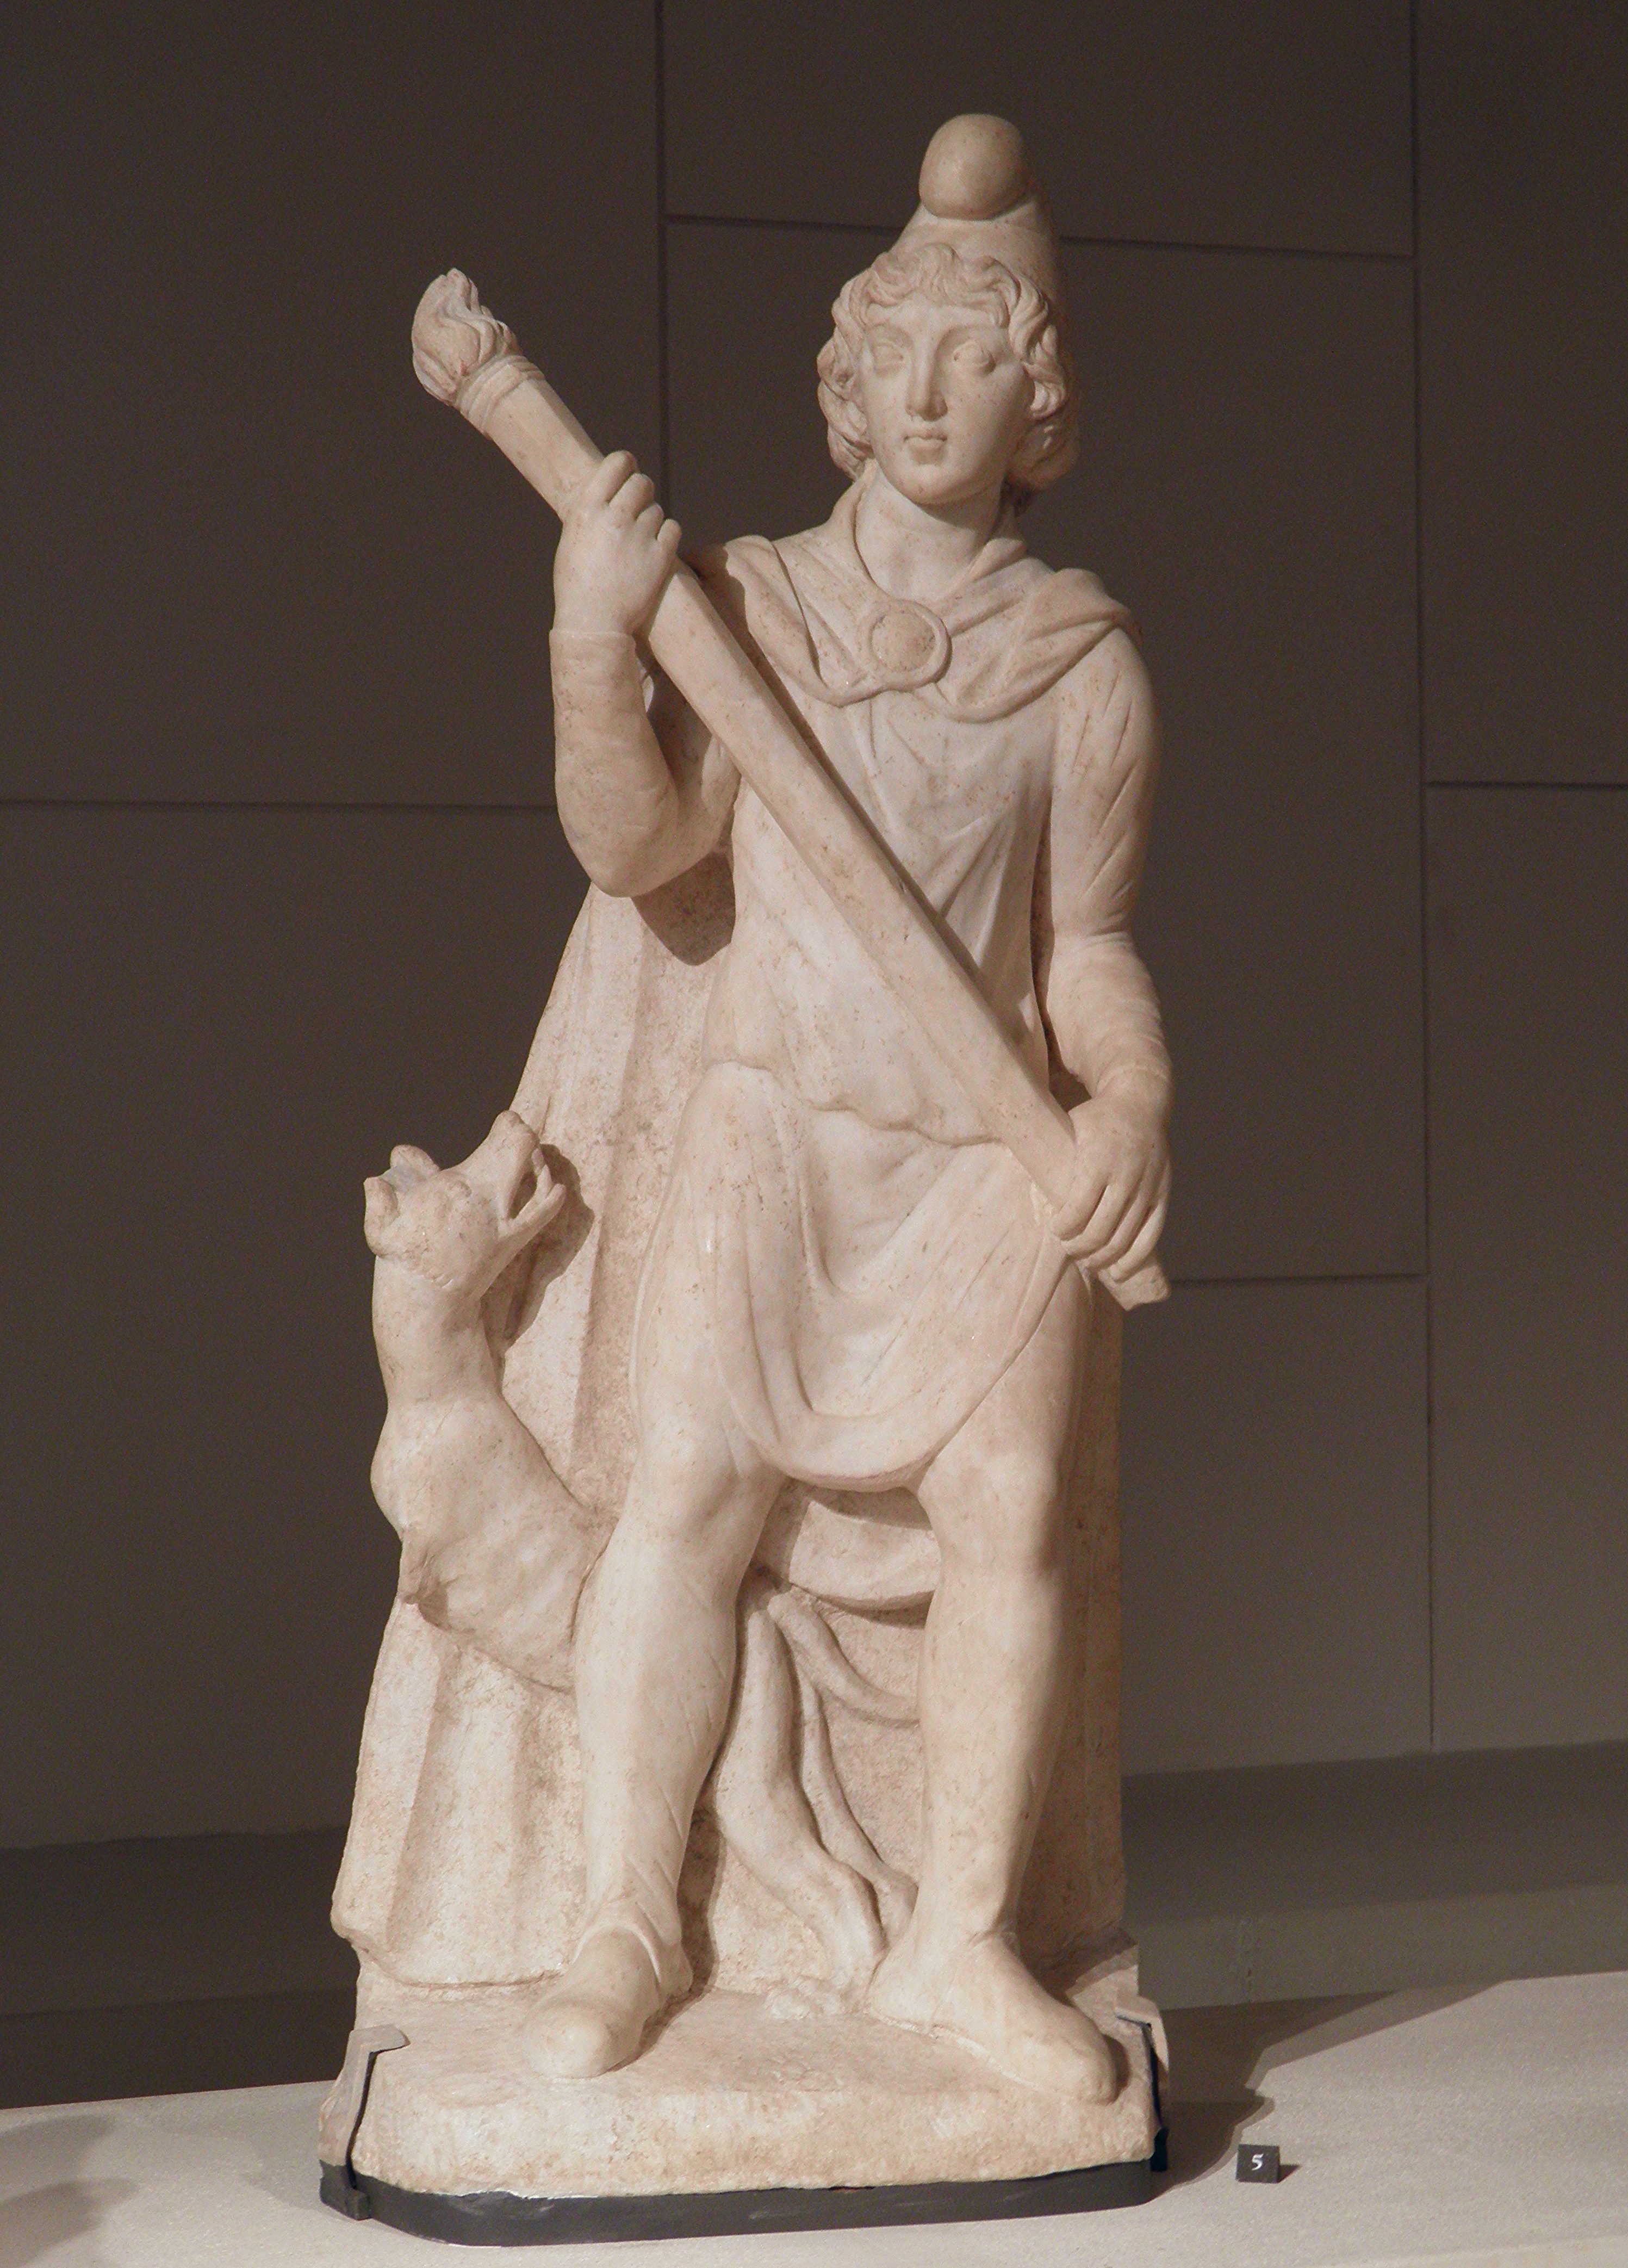 Marble statuette depicting Cautes holding his torch raised up (sunrise), from the Mithraeum at Sidon (Colonia Aurelia Pia, Syria), Louvre Museum (9362295423)